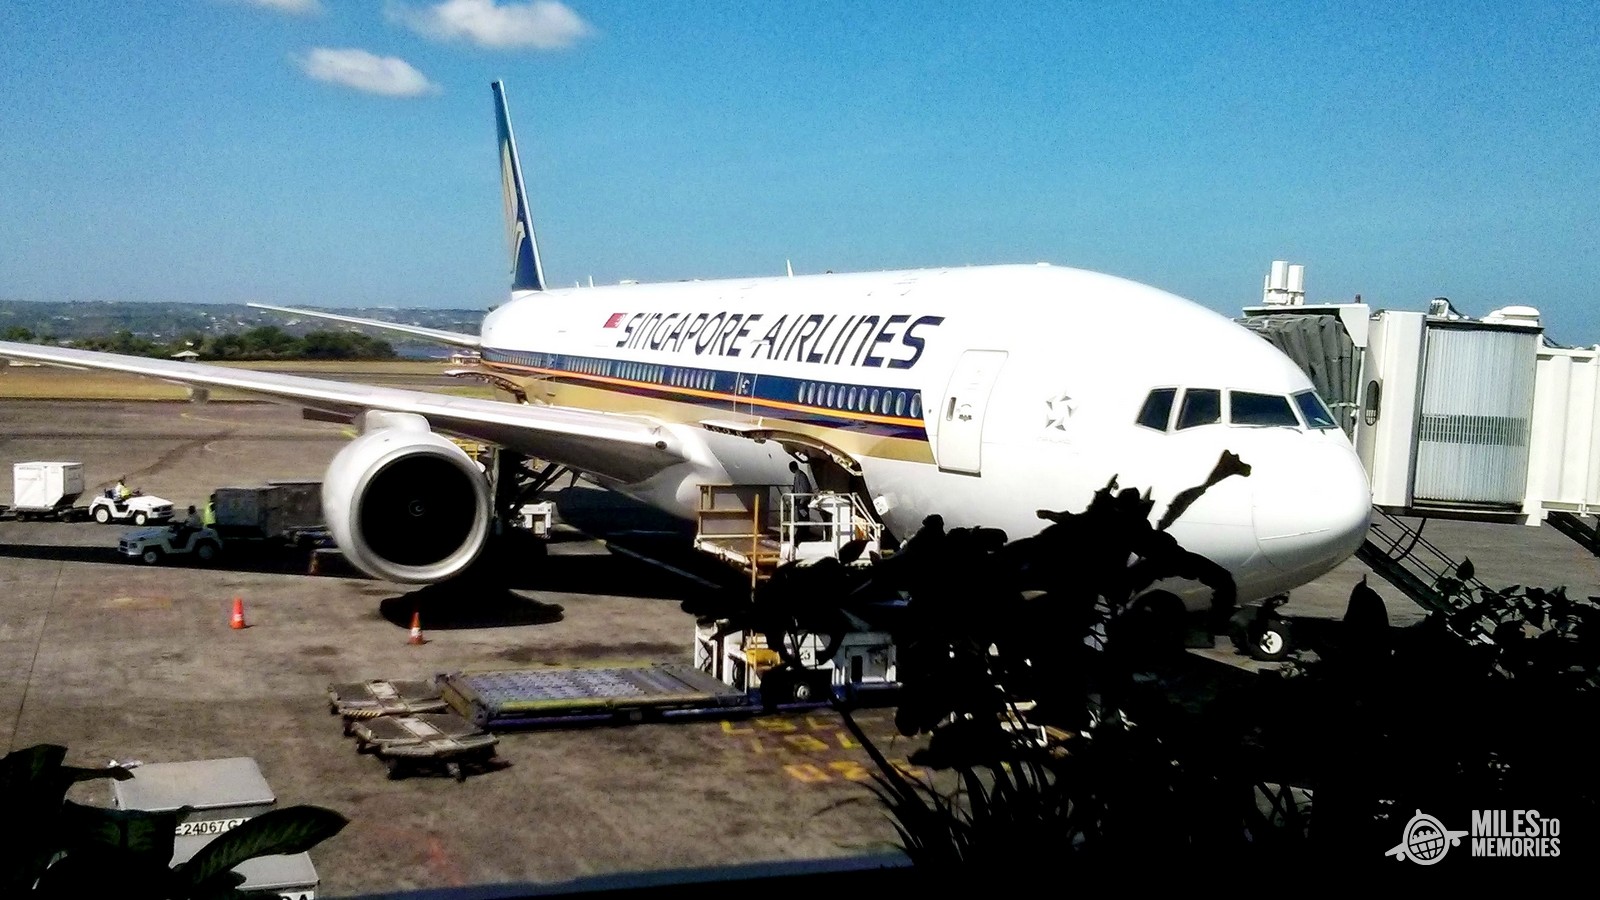 Best uses of Singapore Airlines KrisFlyer Miles